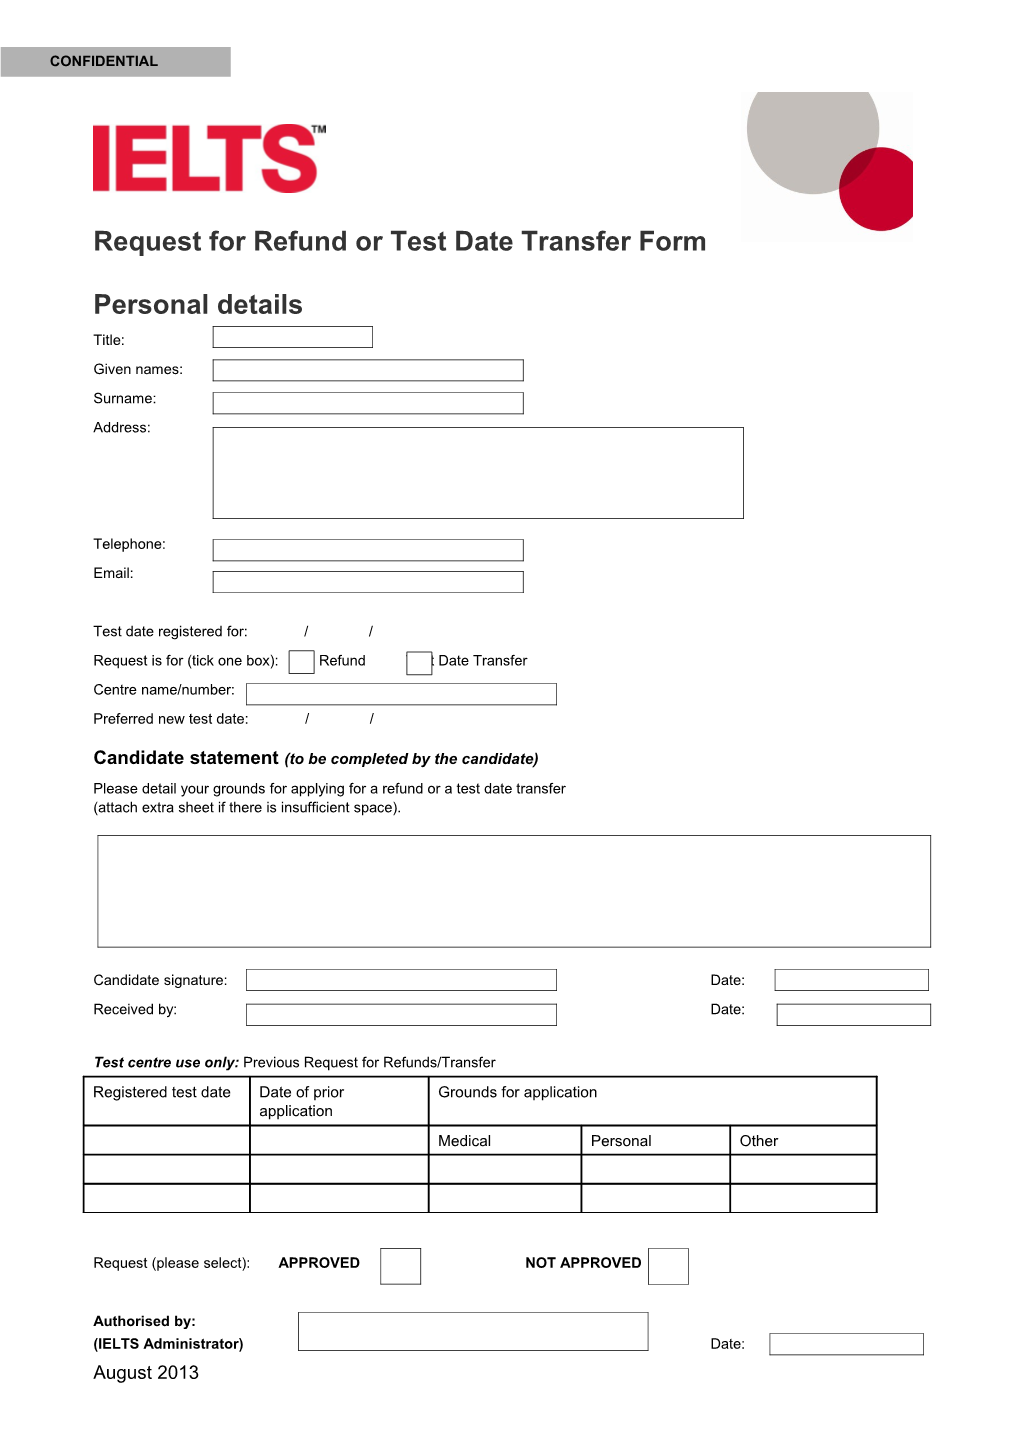 Request for Refund Or Test Date Transfer Form